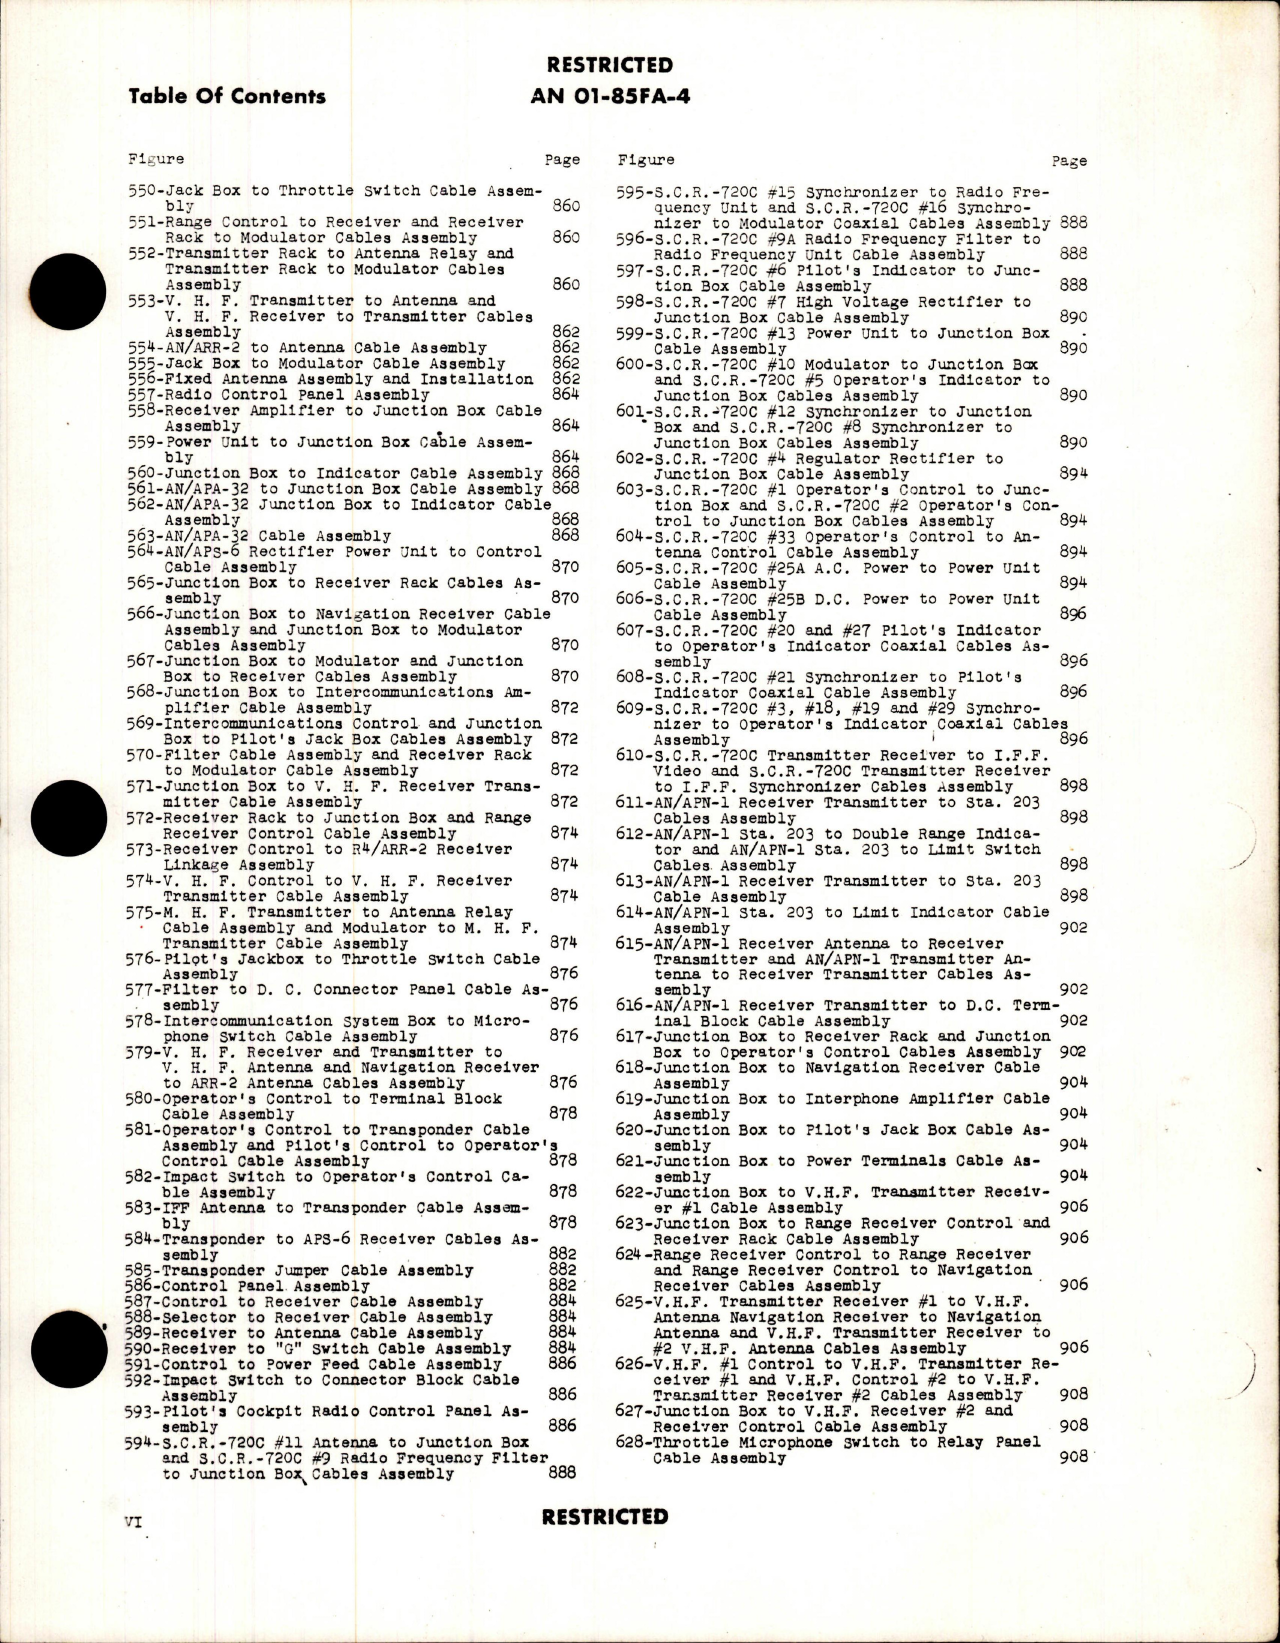 Sample page 8 from AirCorps Library document: Parts Catalog for F7F-1N, F7F-2N, F7F-3, F7F-3N, and F7F-4N